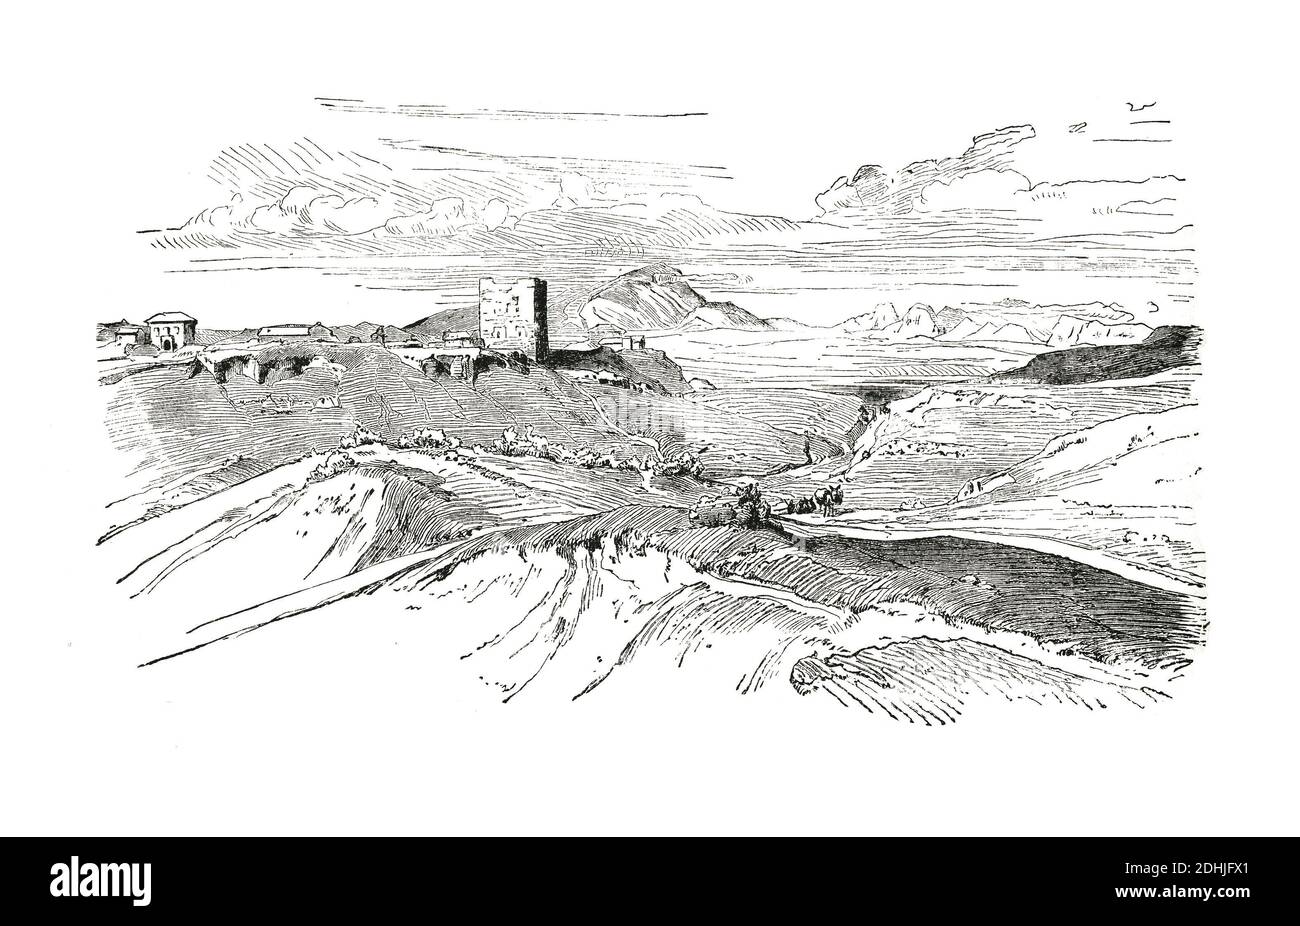 Original artwork of The Site of Thebes - (Skech from Nature by L. Gurlitt). Published in A pictorial history of the world's great nations: from the ea Stock Photo